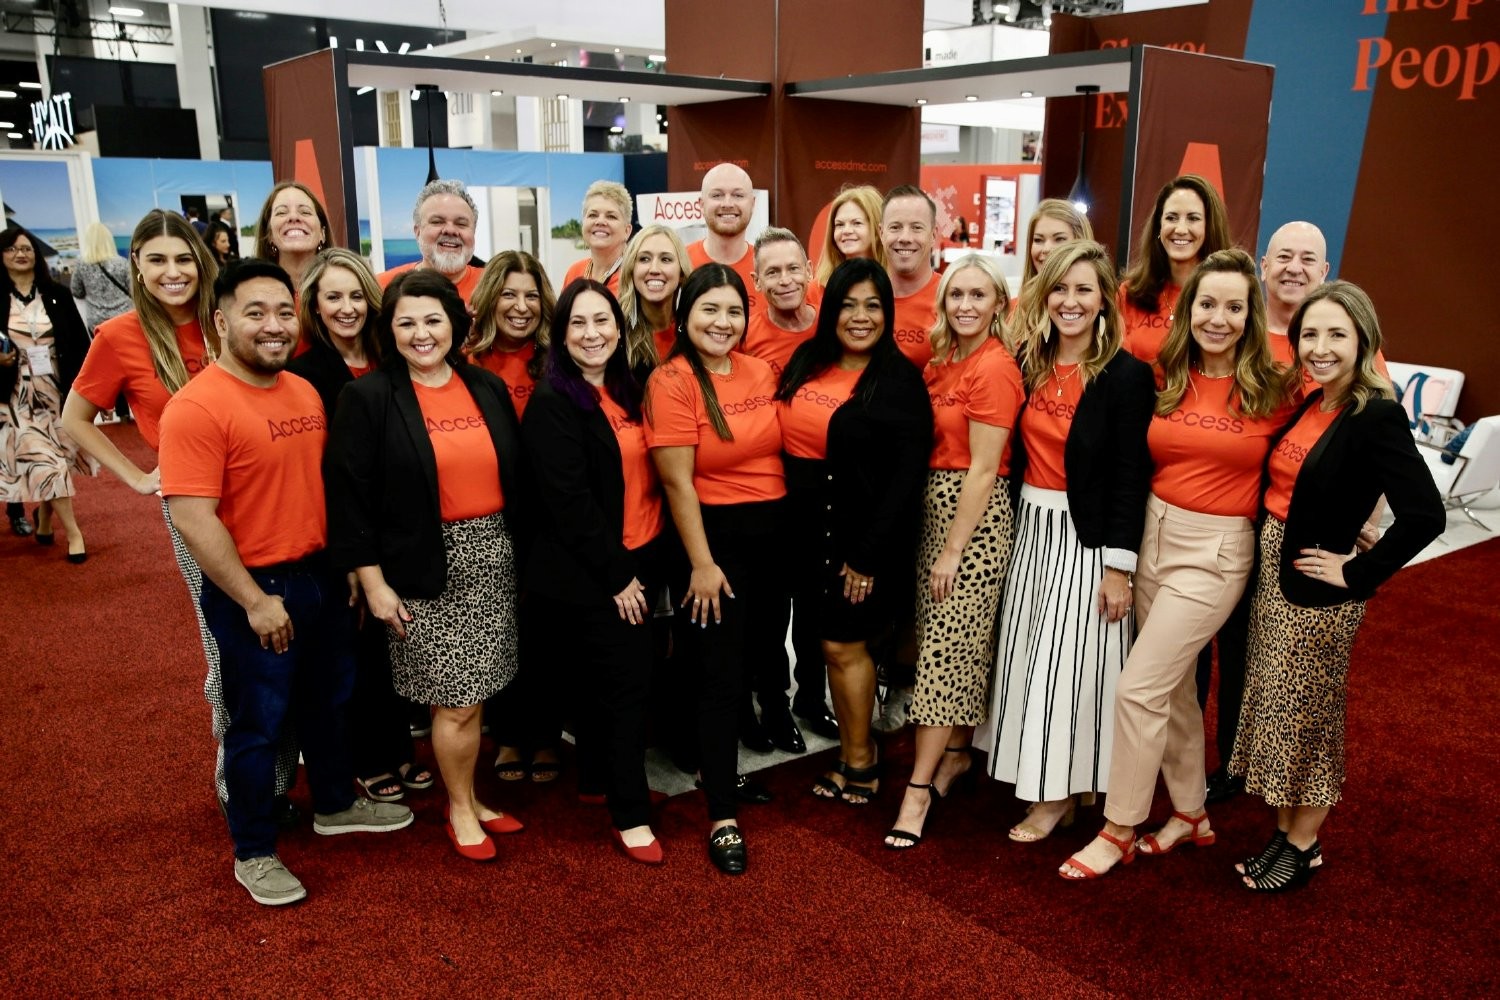 Our team representing Access at IMEX America, the hospitality industry's biggest U.S. tradeshow